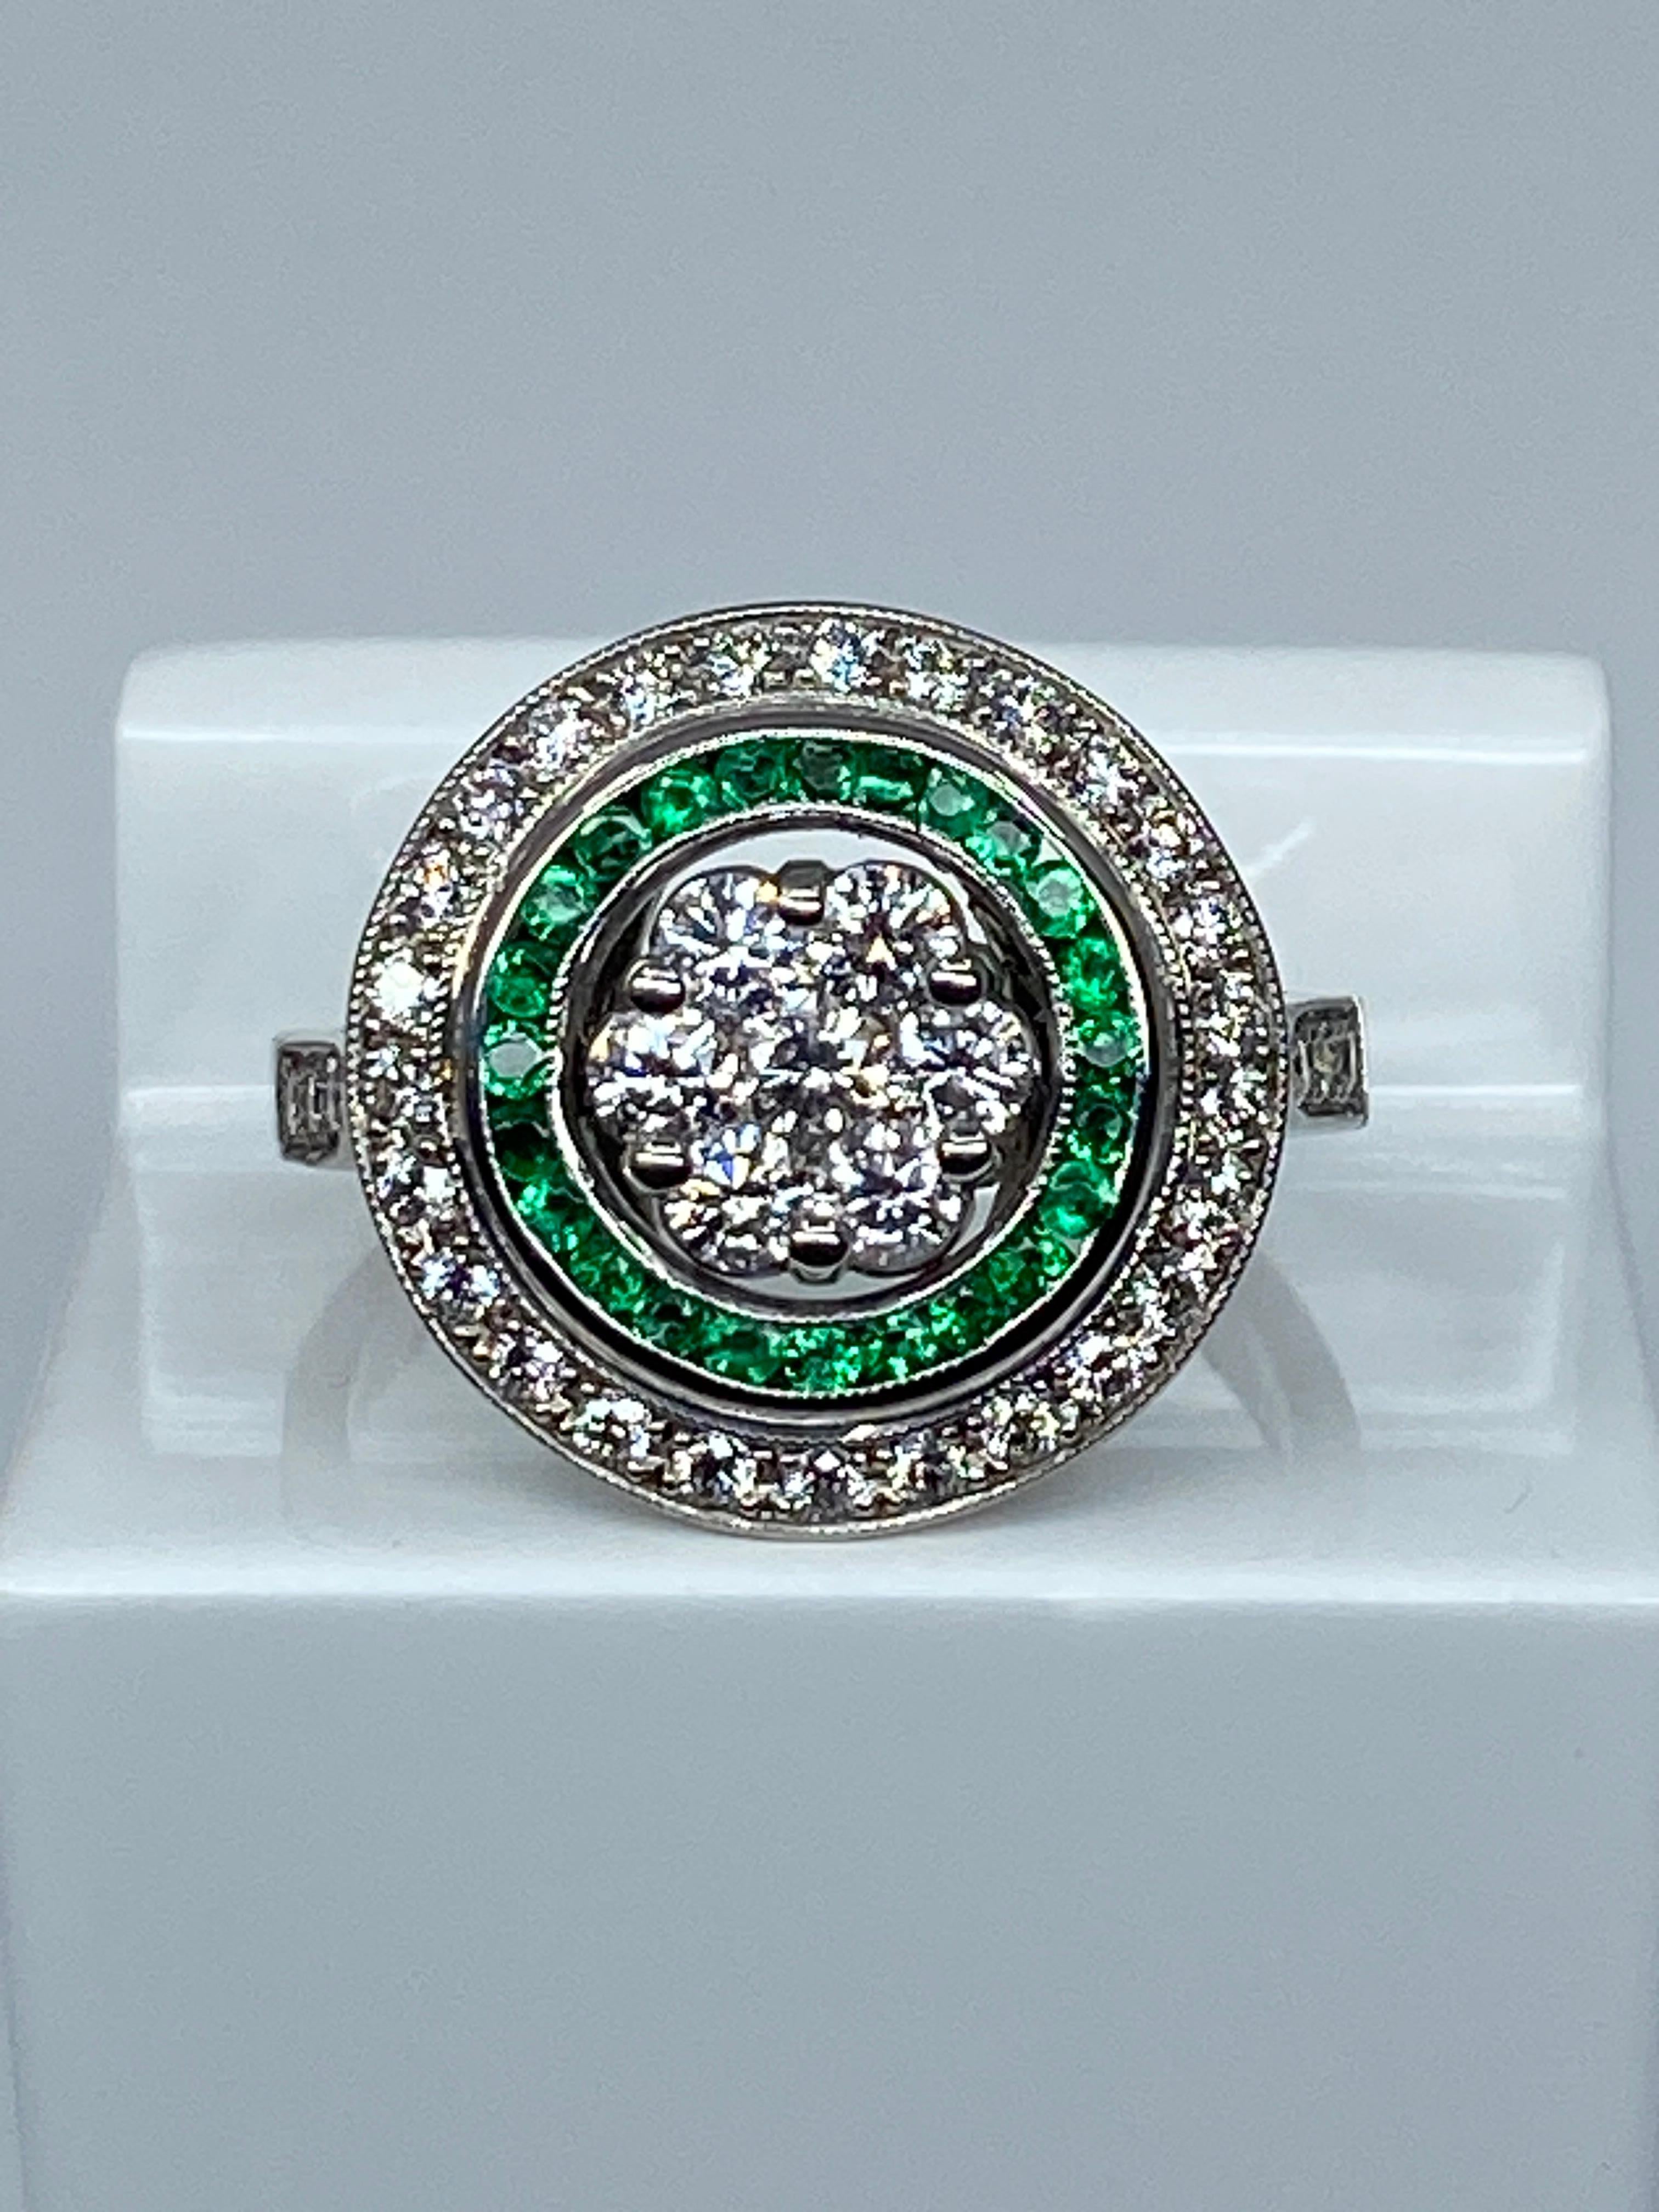 18 Carat Gold Round Ring Set with Calibrated Emeralds and Diamonds Art Déco Styl 5